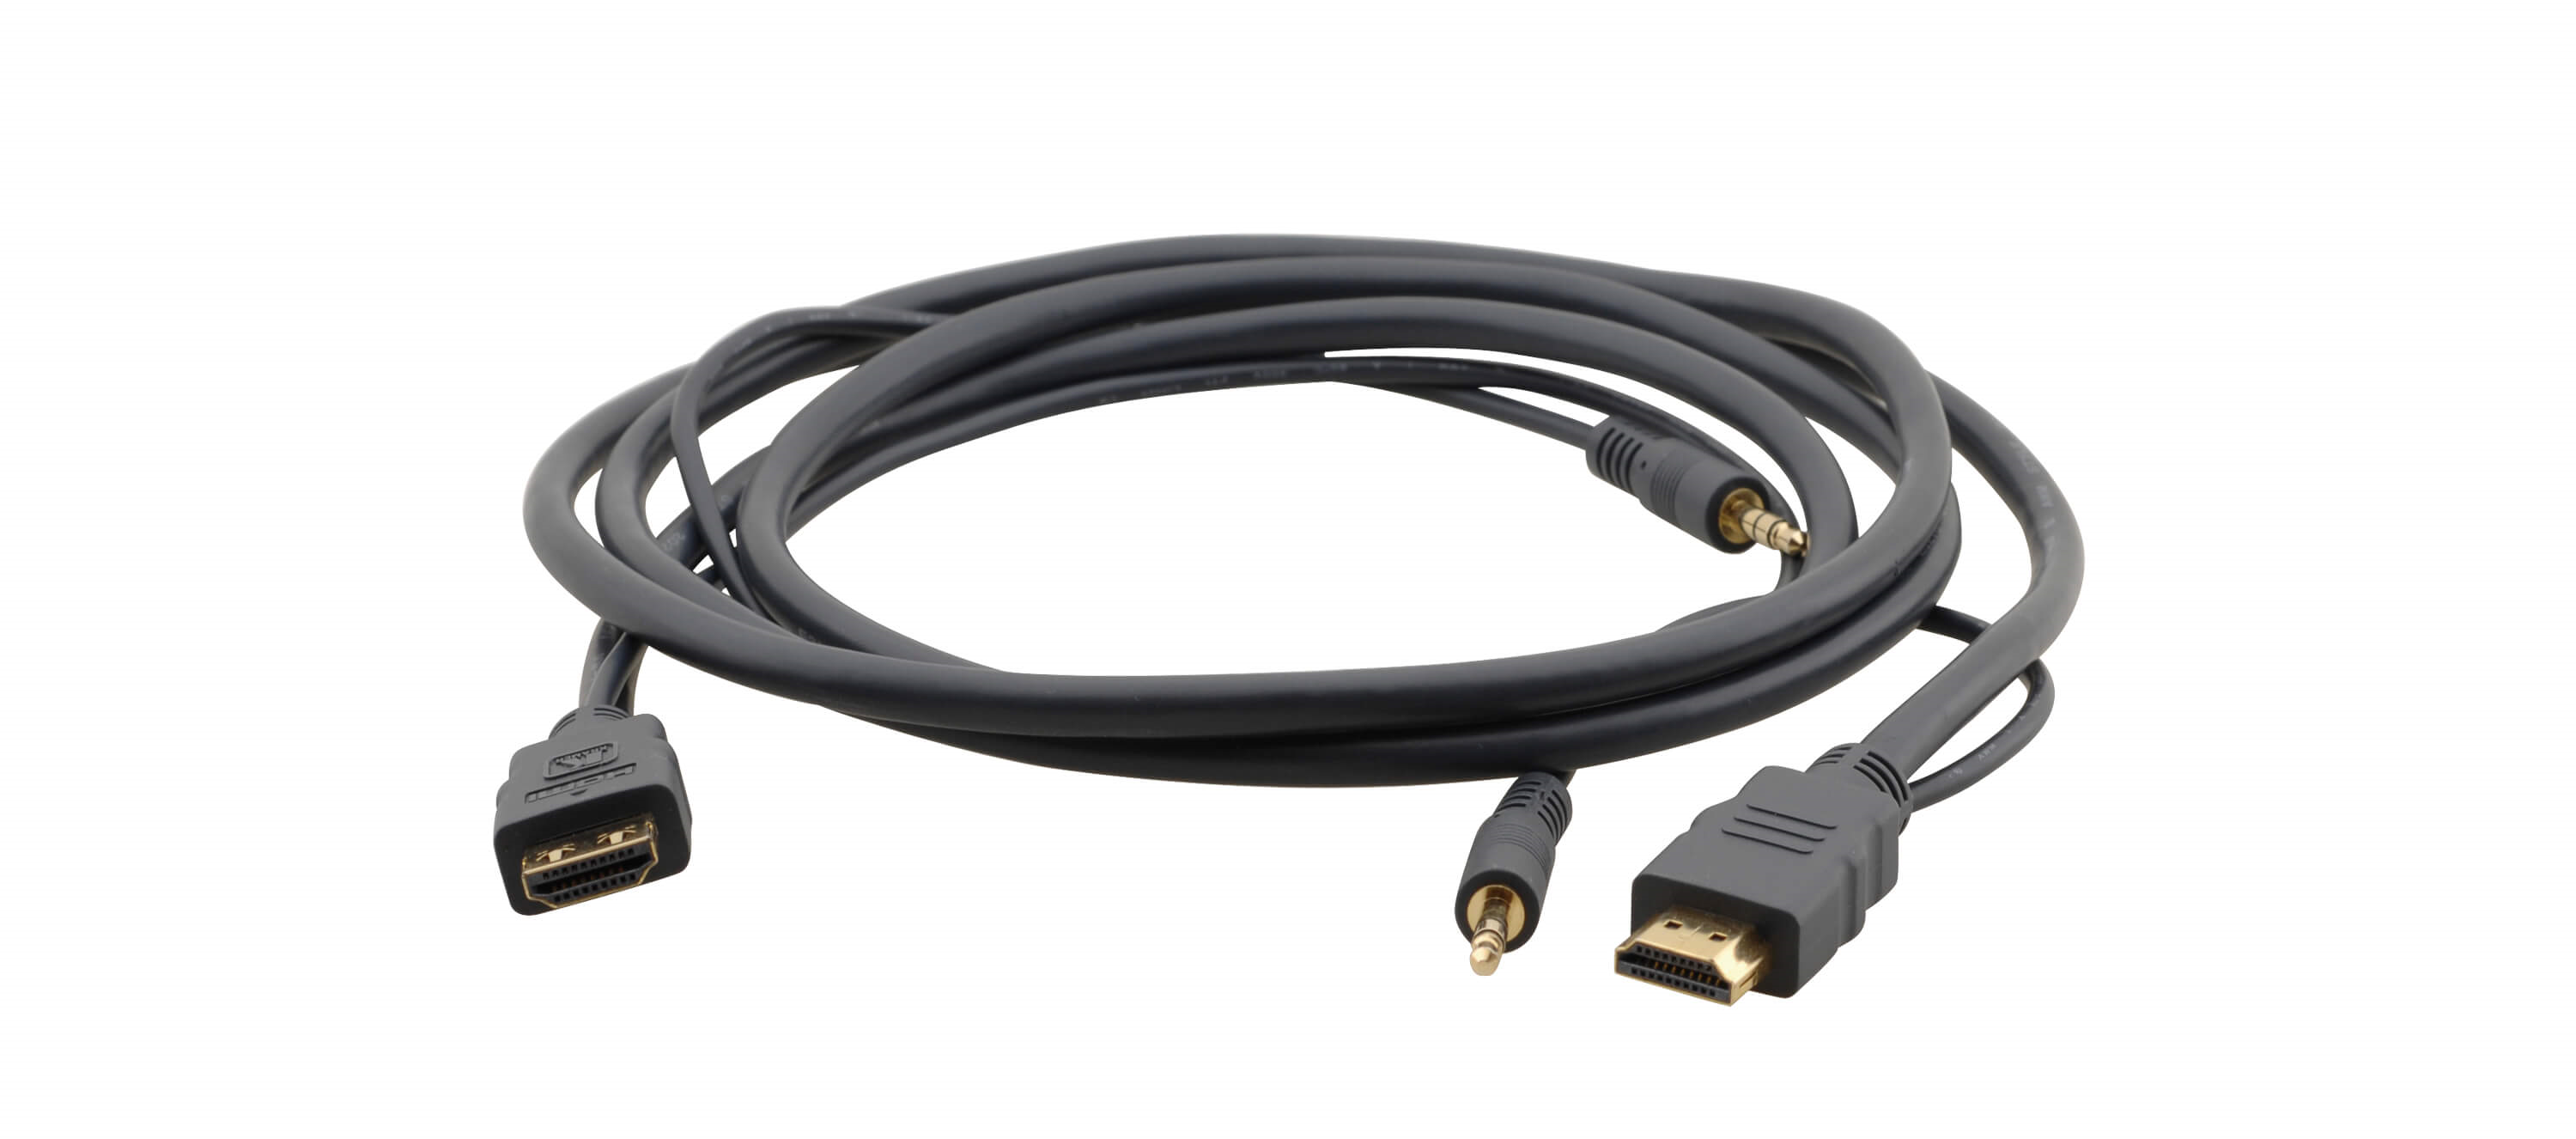 C-MHMA/MHMA-10 Flexible High–Speed HDMI Cable with Ethernet & 3.5mm Stereo Audio - 10'